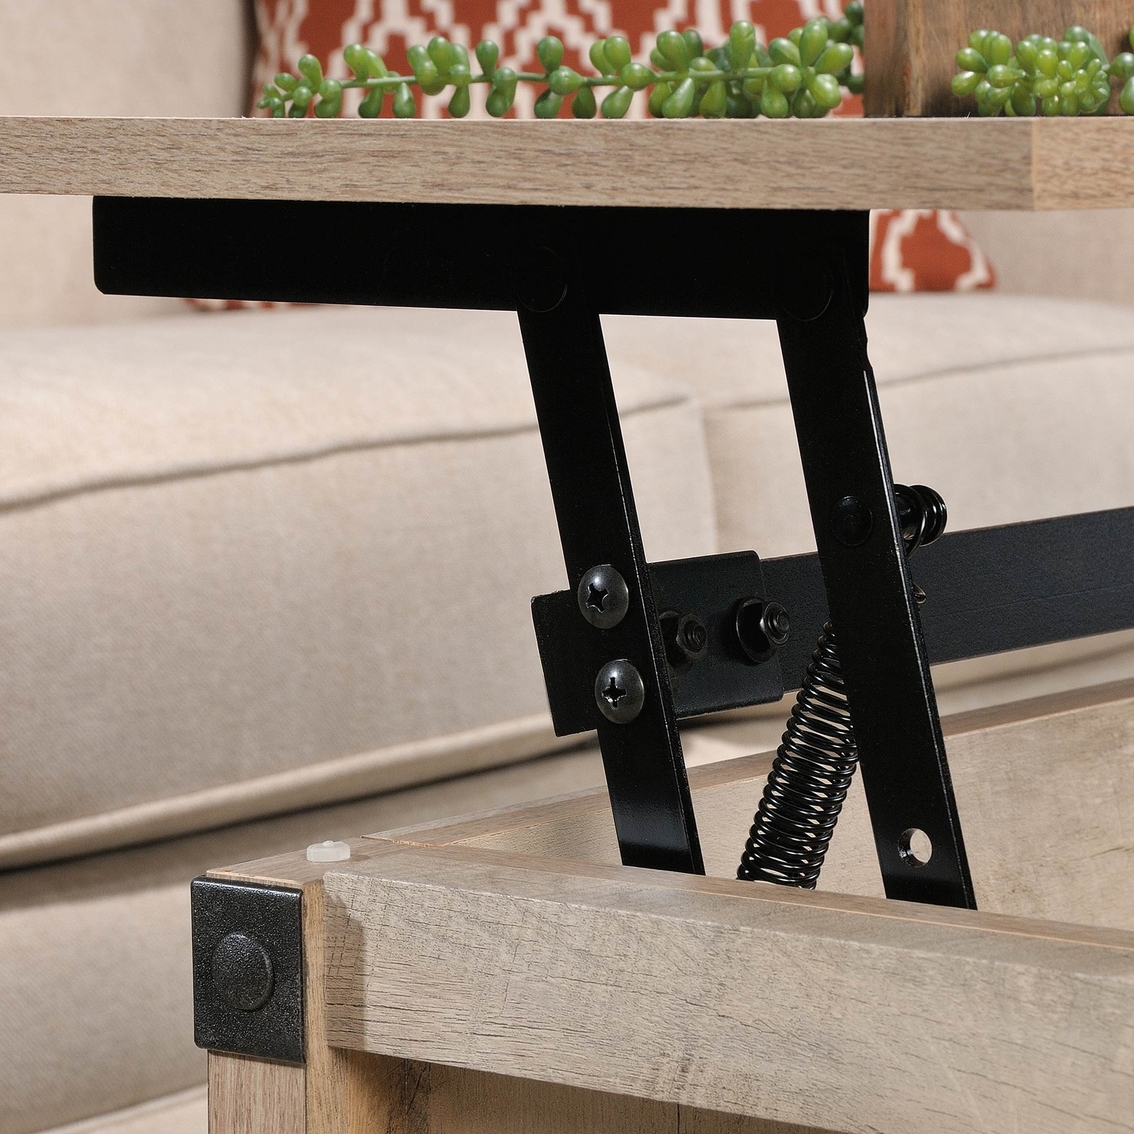 Sauder Carson Forge Lift Top Coffee Table - Image 4 of 4